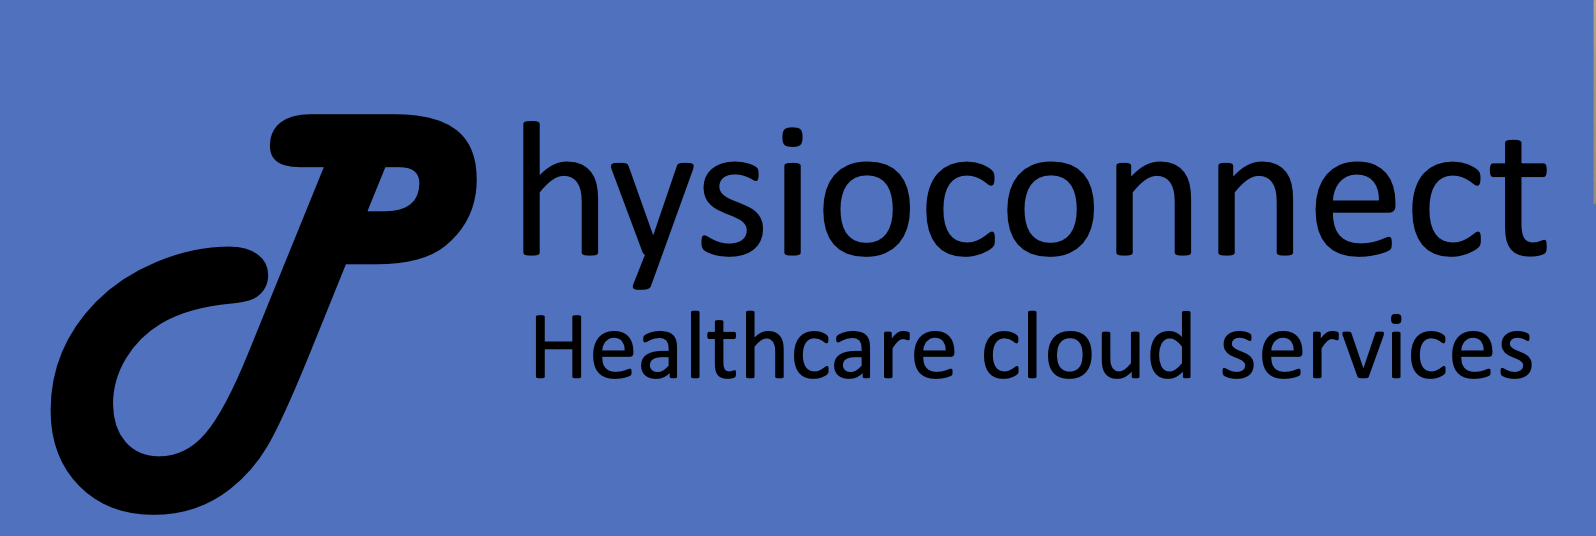 image of text "physioconnect: healthcare cloud services", black text on blue background